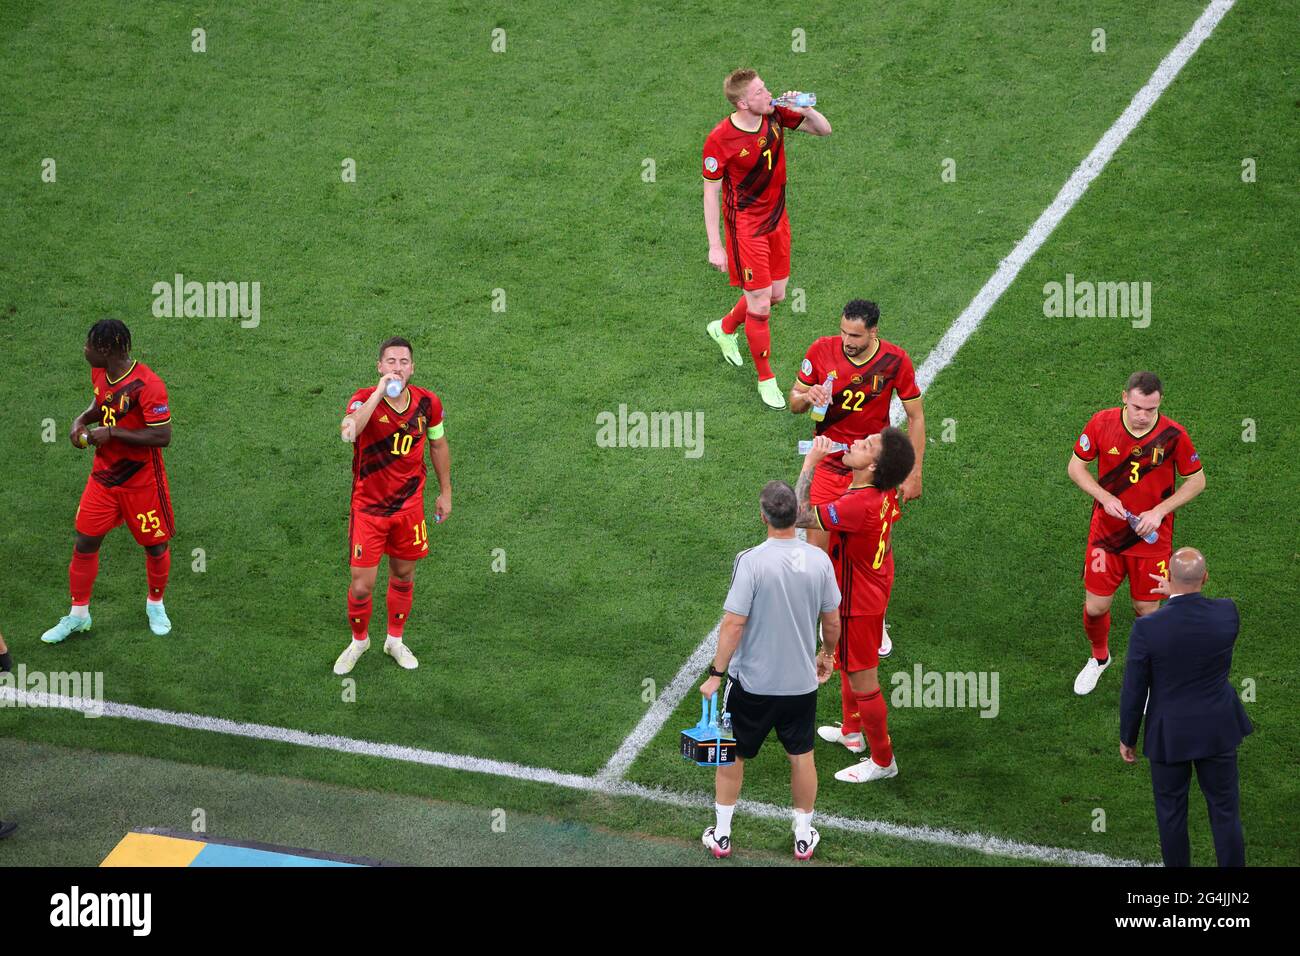 Saint Petersburg, Russia. 21st June, 2021. Jeremy Doku (25), Eden Hazard (10), Kevin De Bruyne (7), Nacer Chadli (22), Axel Witsel (6), and Thomas Vermaelen (3) of Belgium are seen during the European championship EURO 2020 between Belgium and Finland at Gazprom Arena.(Final Score; Finland 0:2 Belgium). Credit: SOPA Images Limited/Alamy Live News Stock Photo